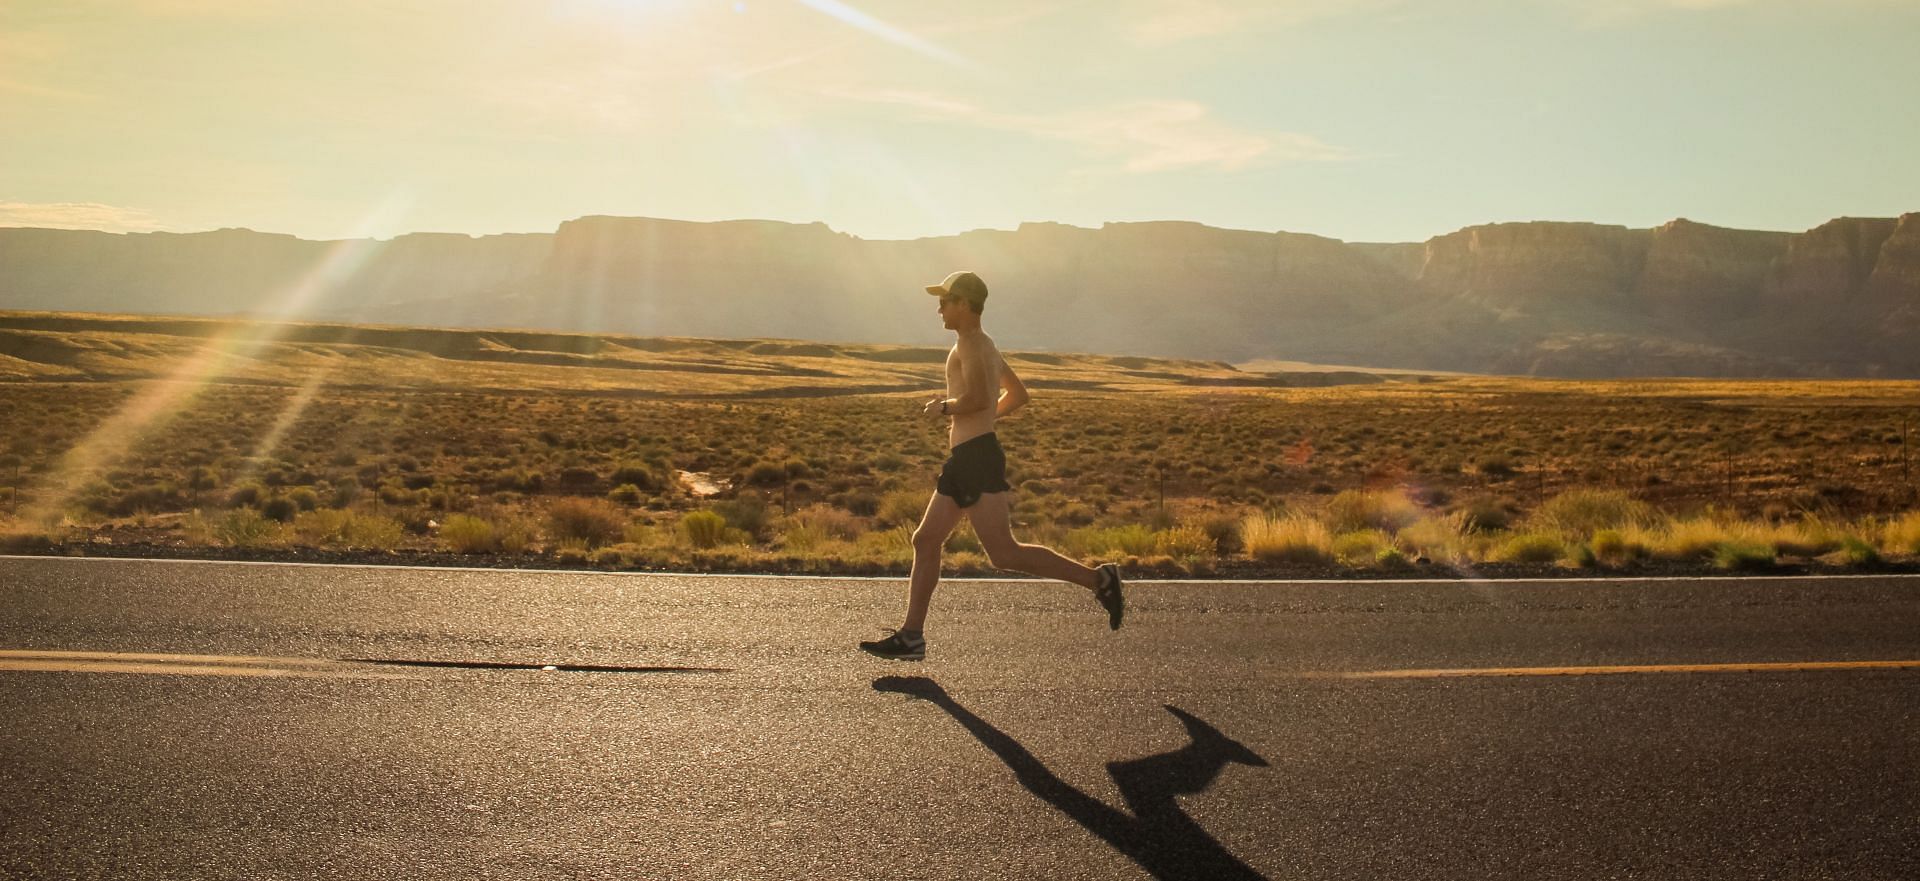 Improve your performance as a runner with a few exercises. (Image via unsplash/Isaac Wendland)